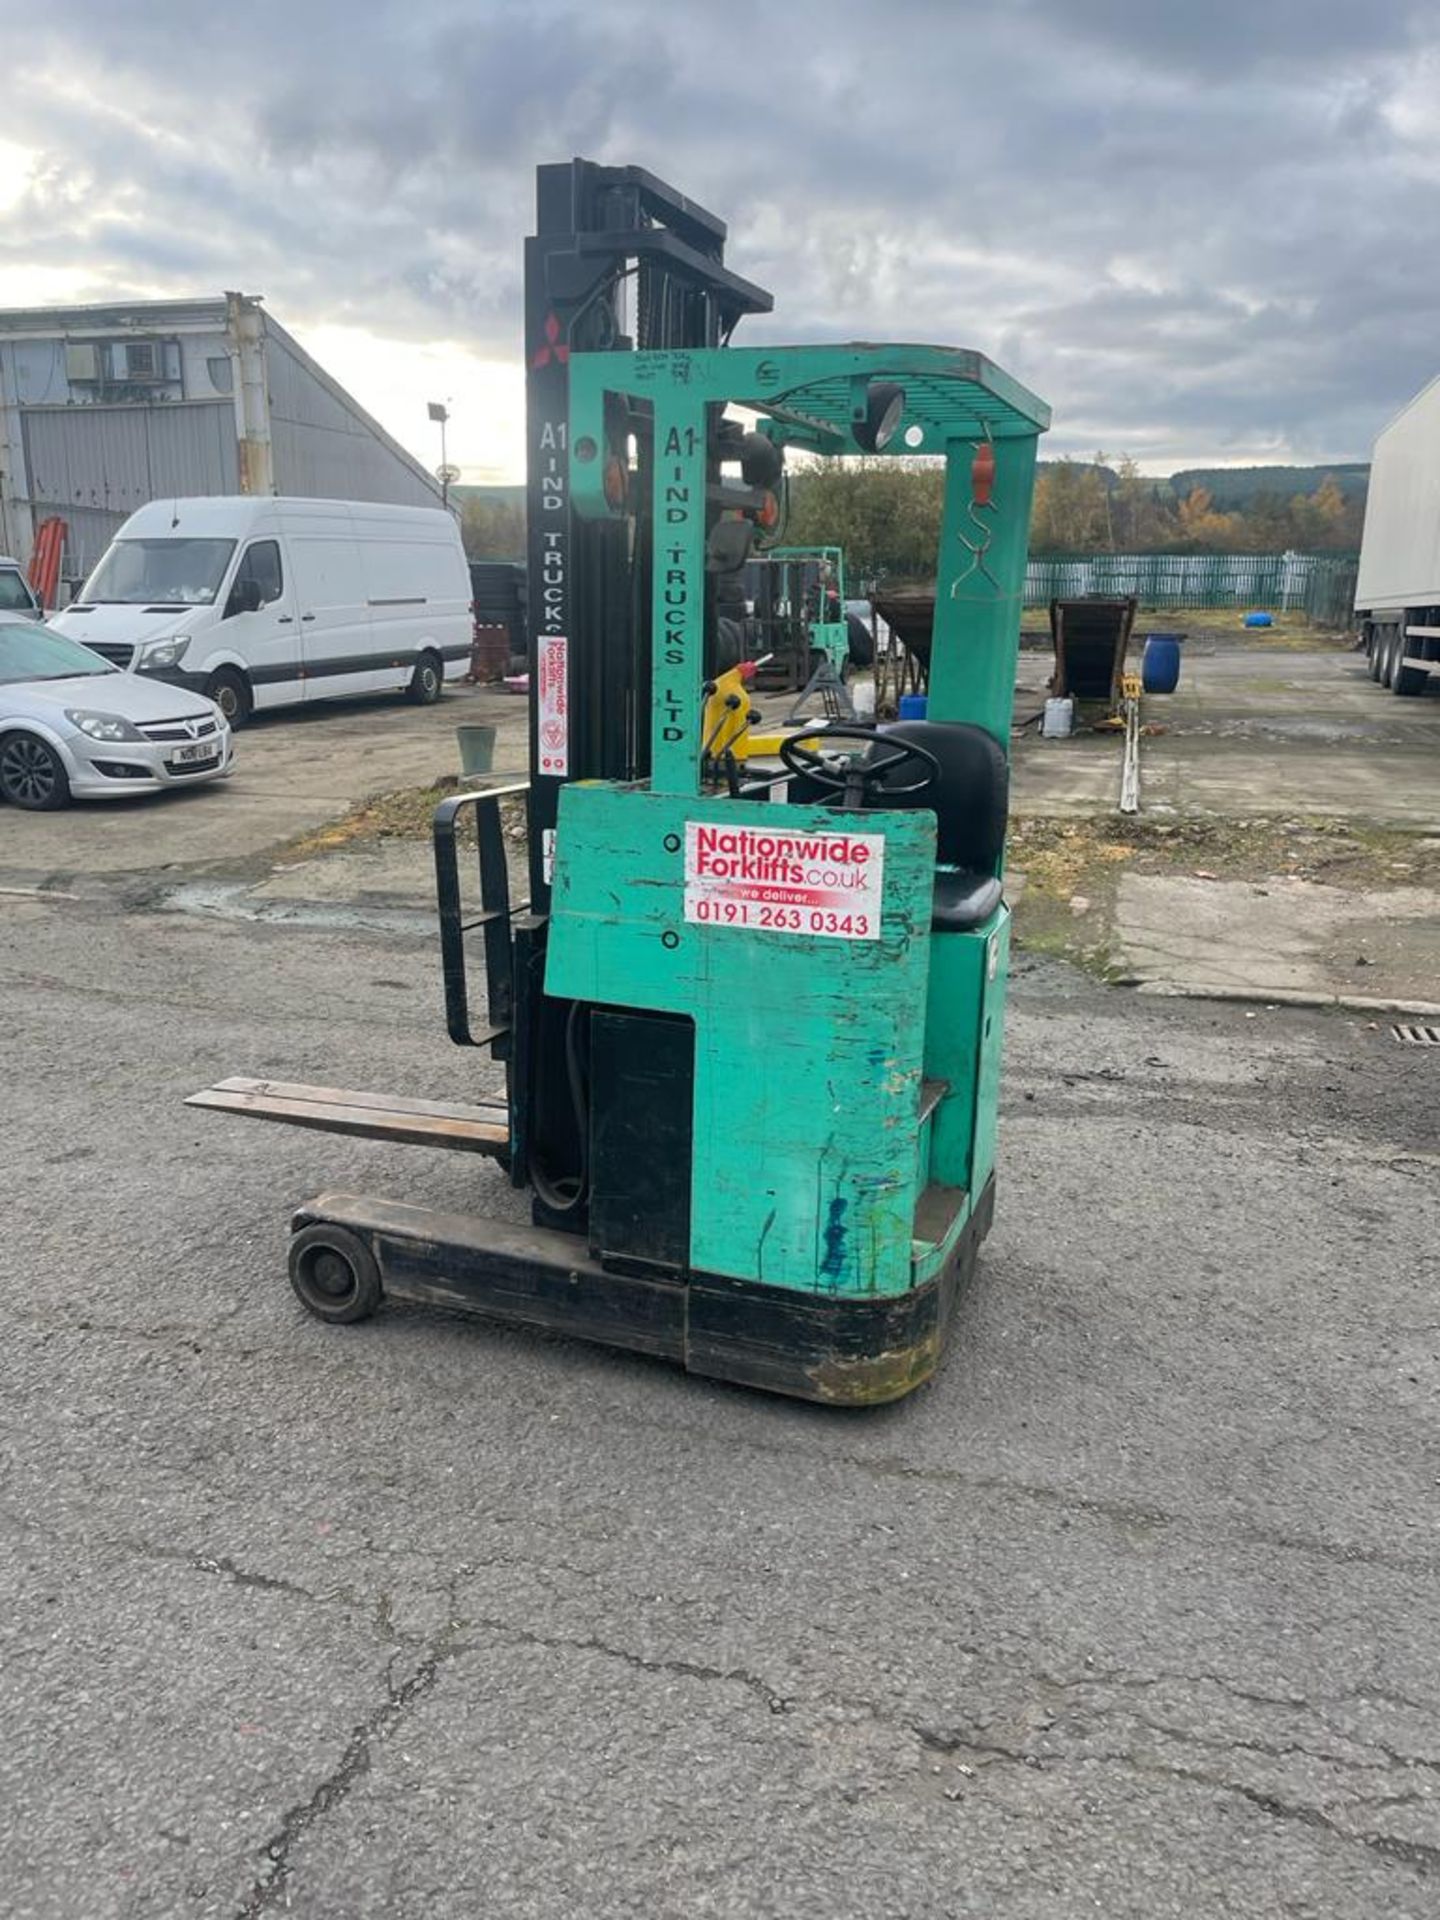 Mitsubishi combi forklift in prime condition this machine has been maintained to the highest